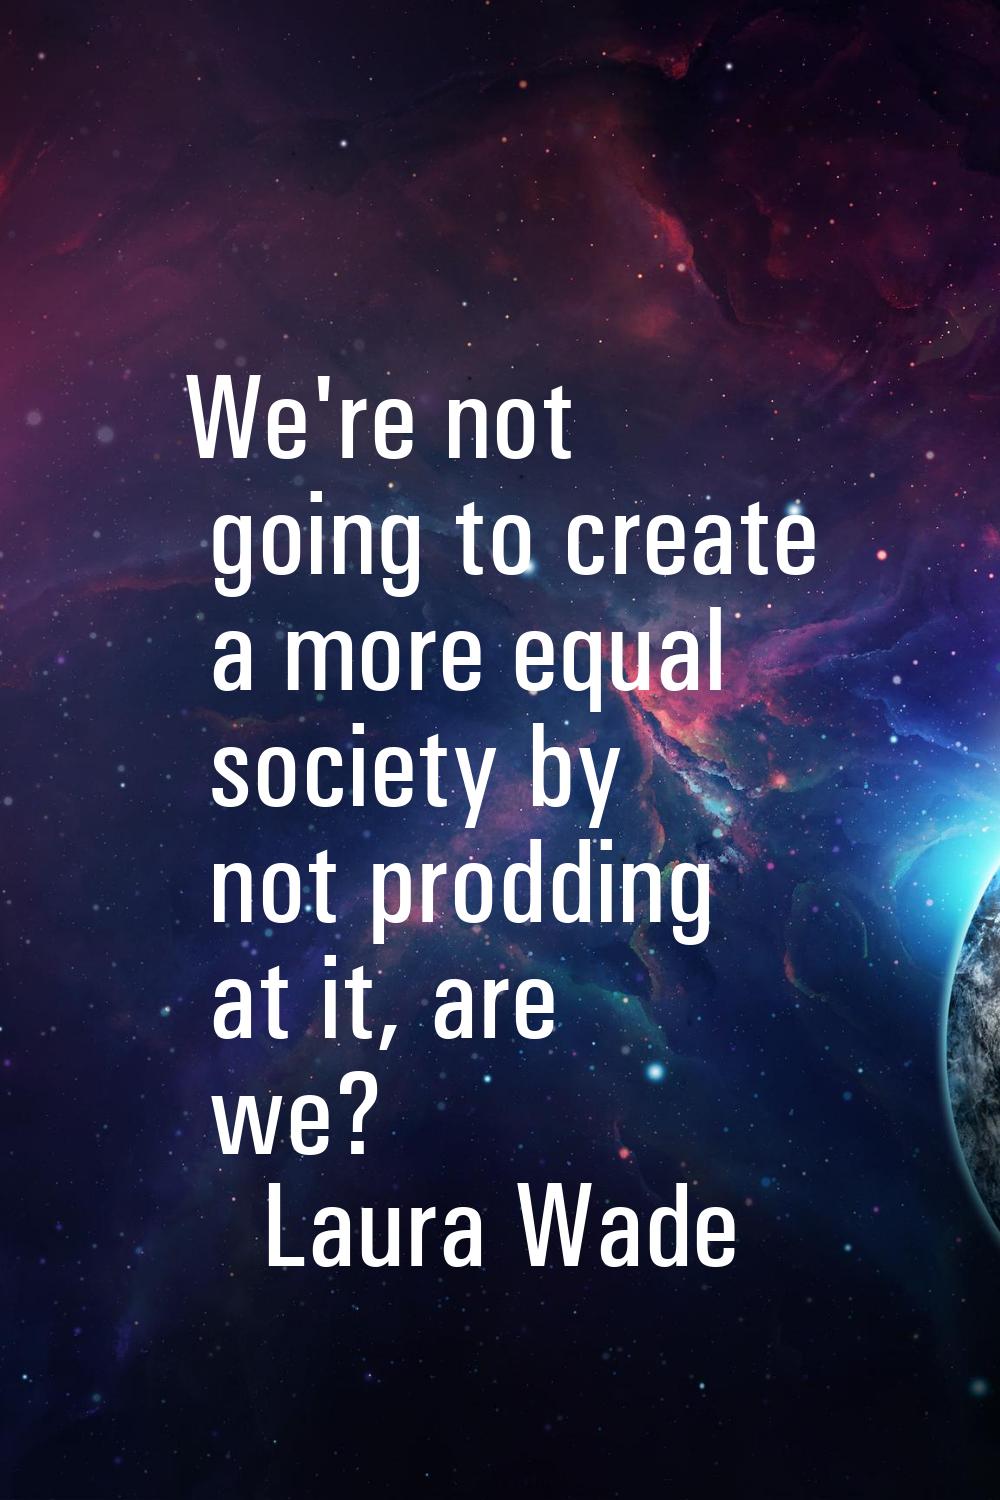 We're not going to create a more equal society by not prodding at it, are we?